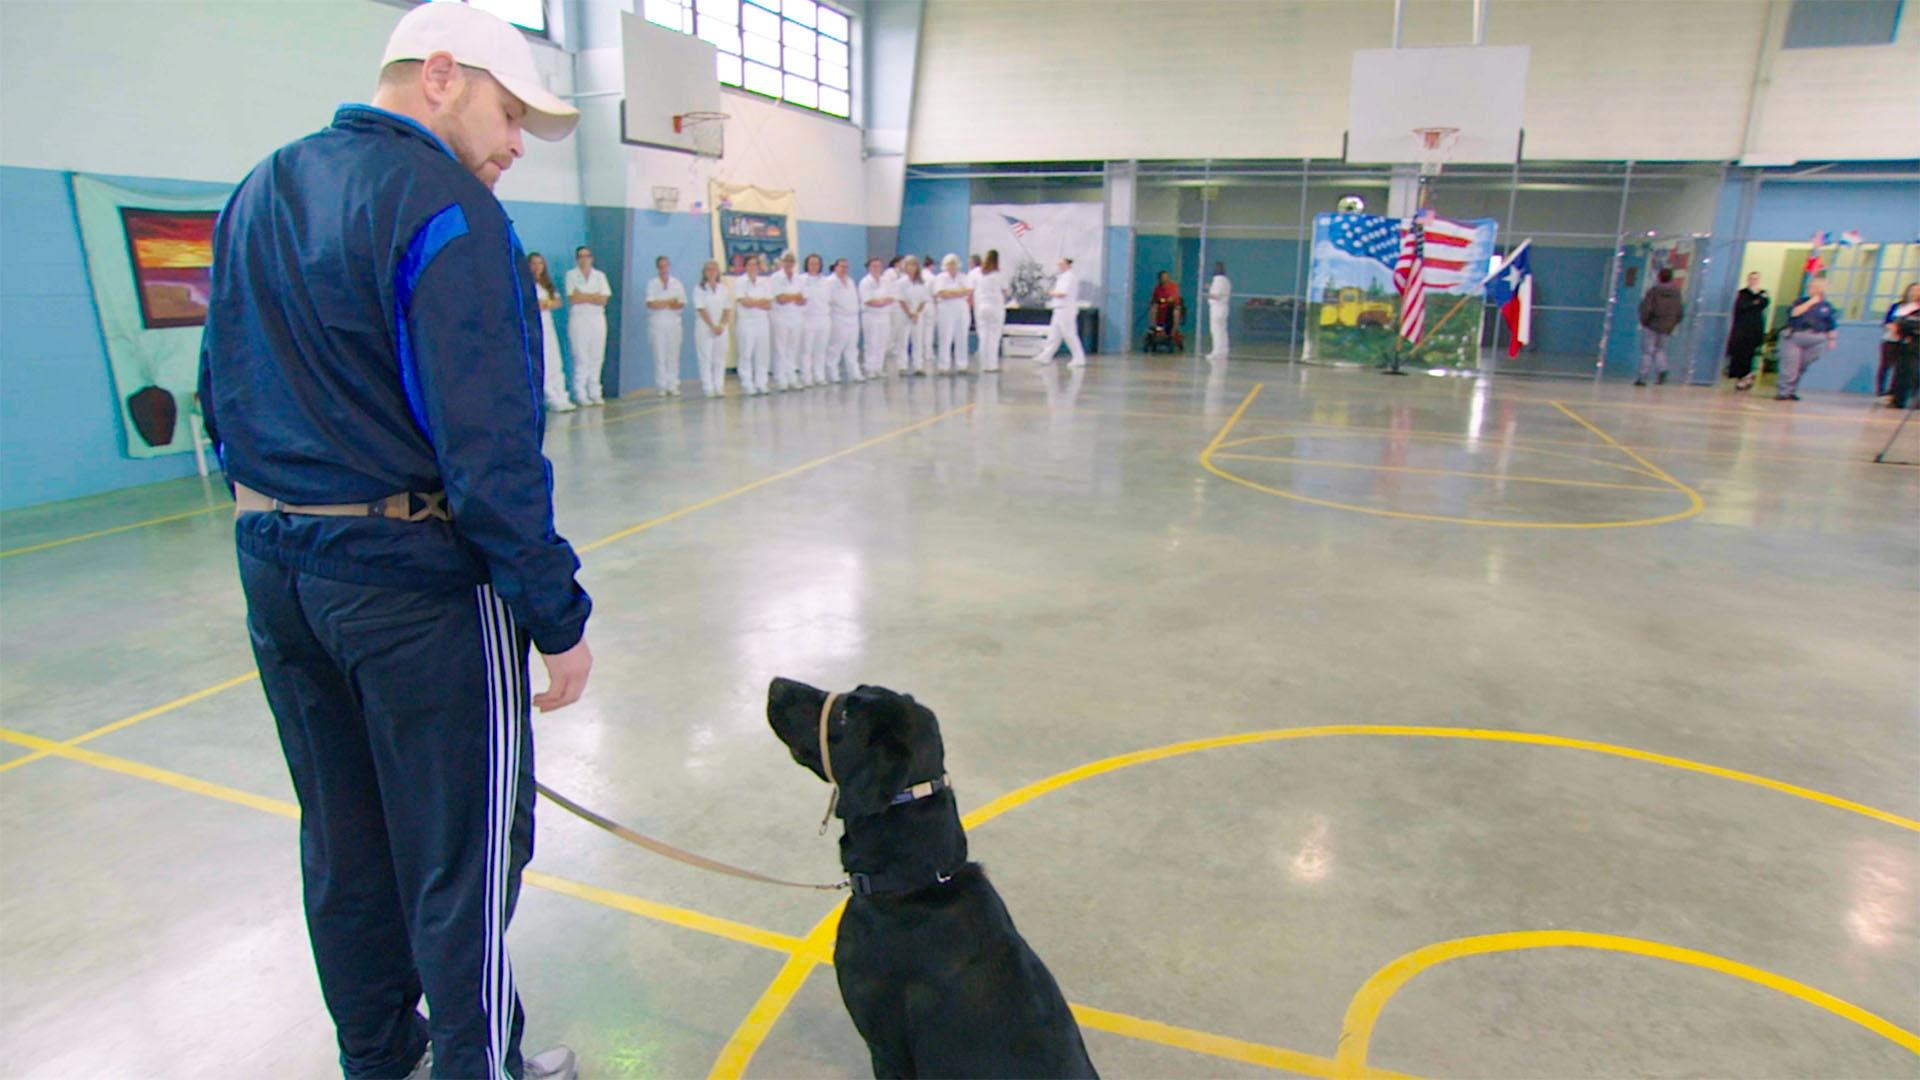 Daniel Heyd, SSGT (Ret.) US Air Force, trains with a service dog.